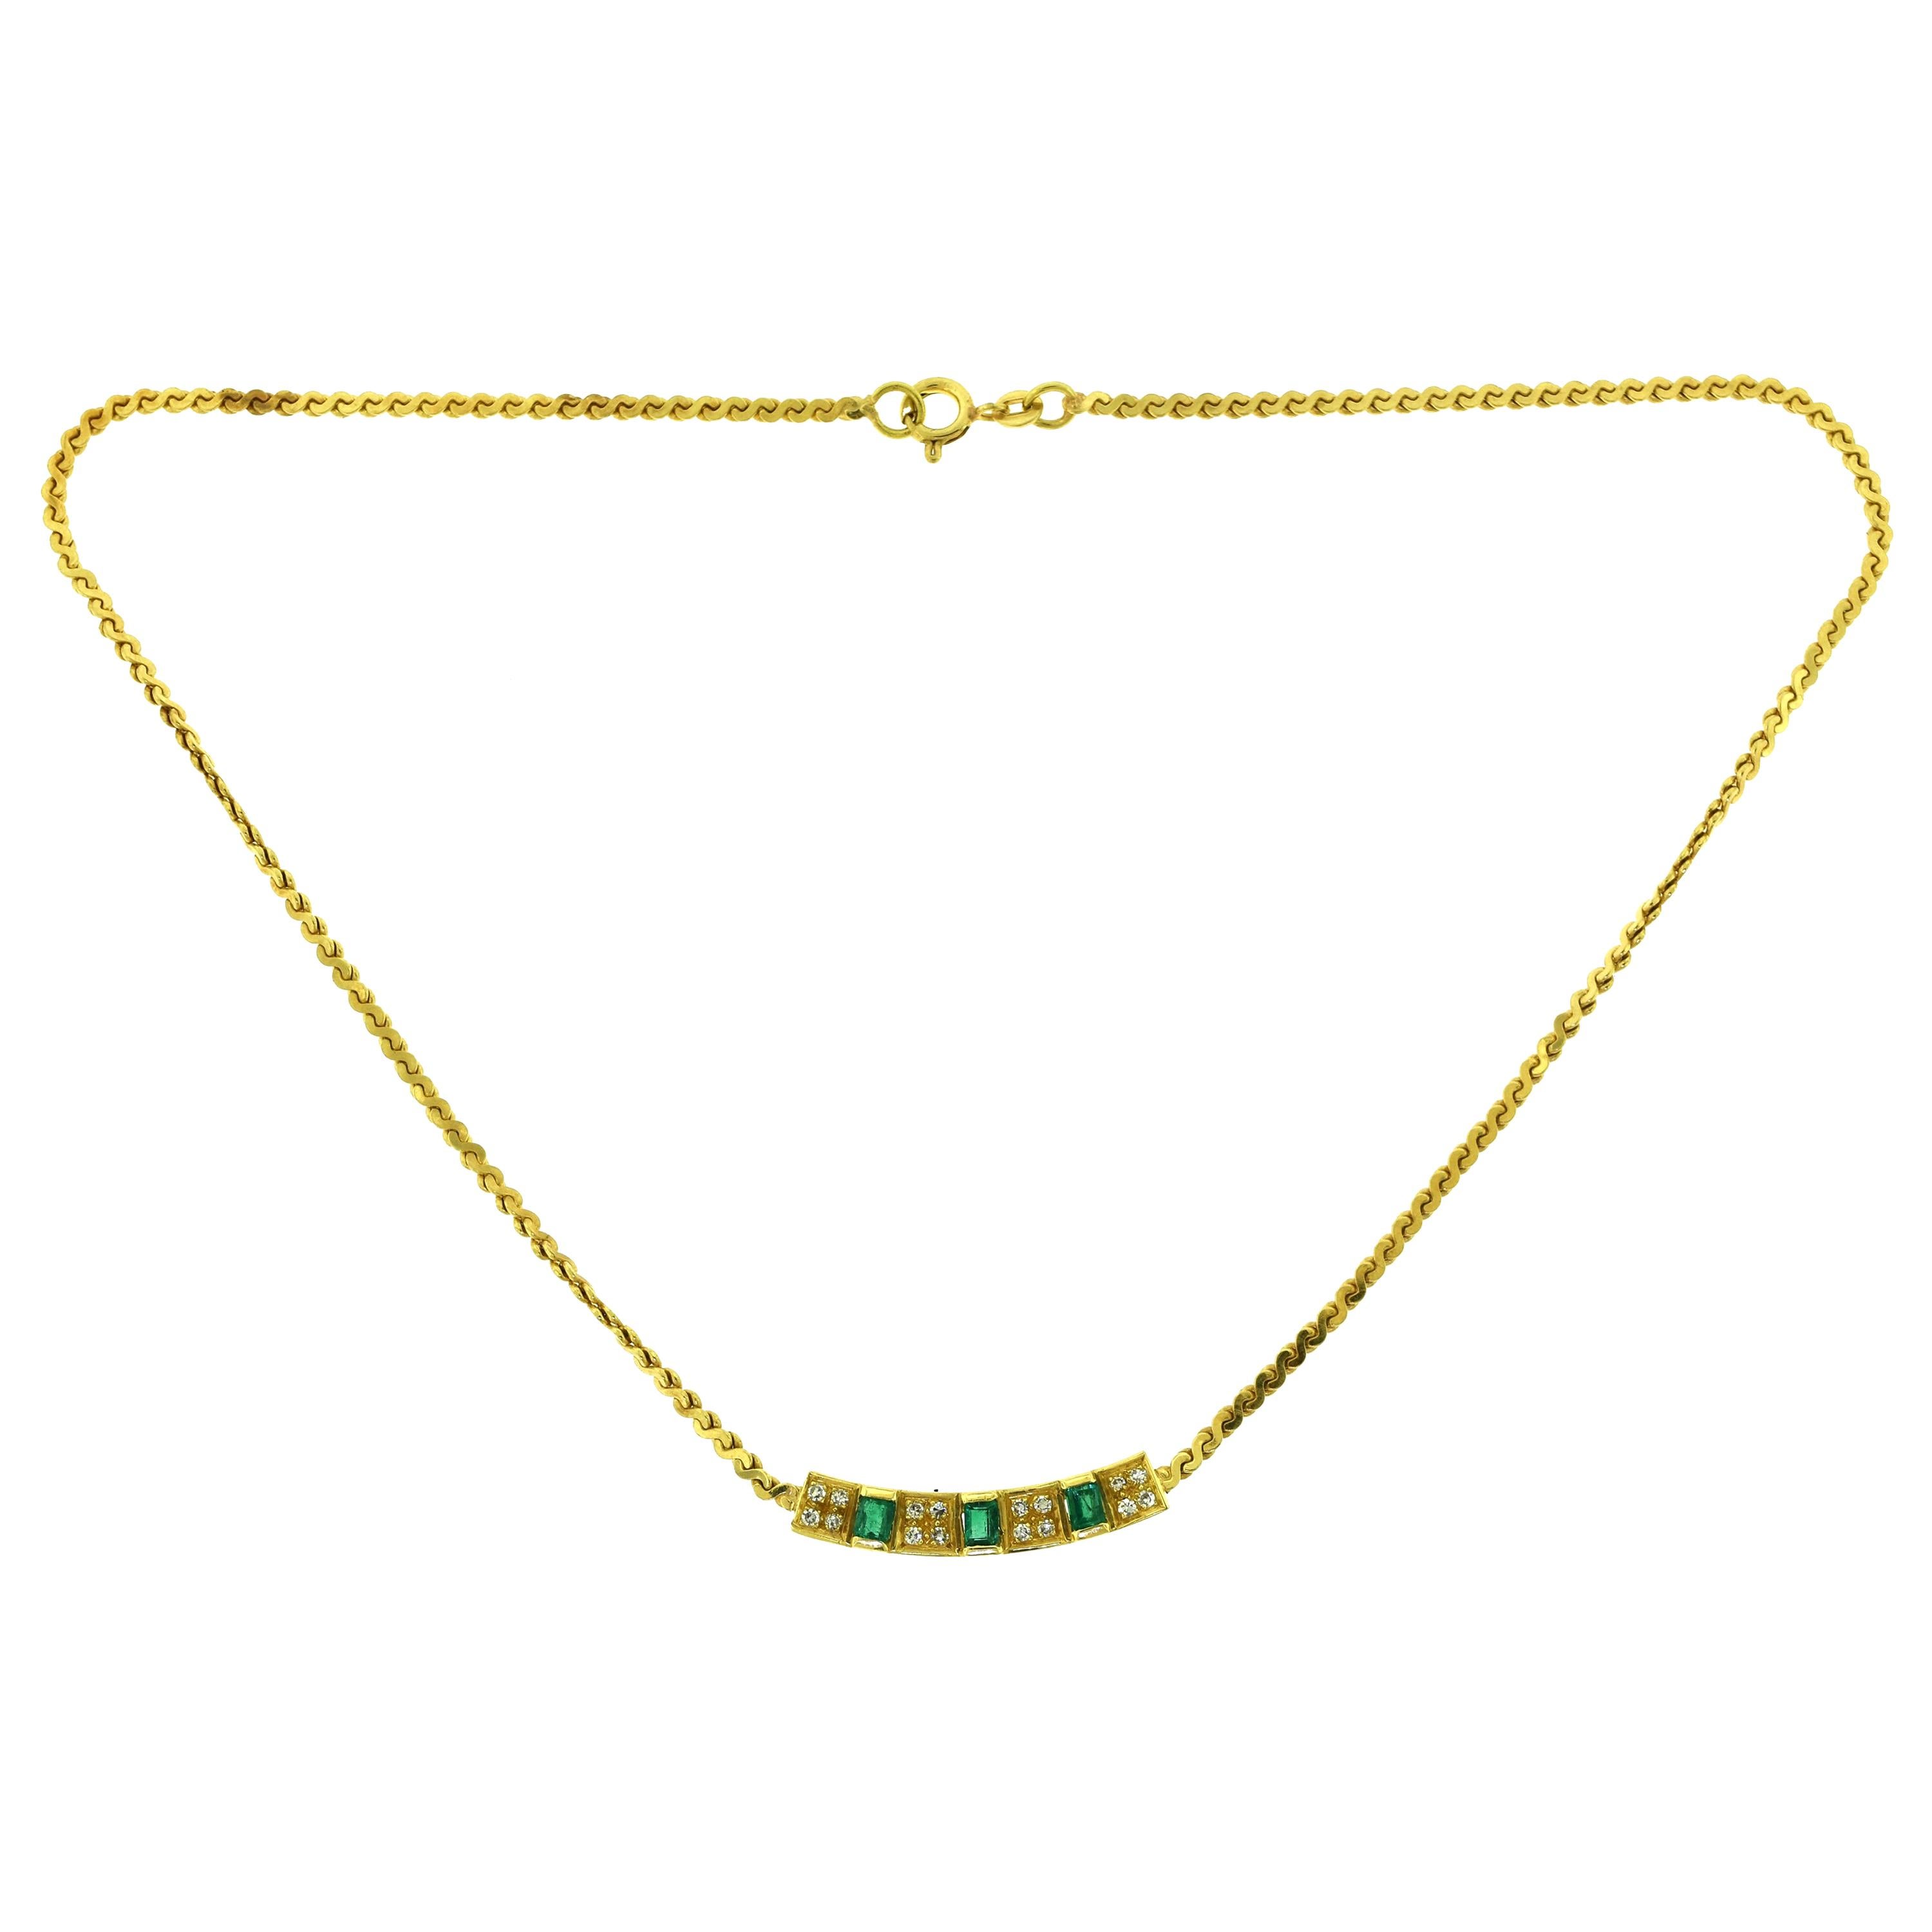 Diamond and Baguette Cut Emerald Bar Yellow Gold Necklace